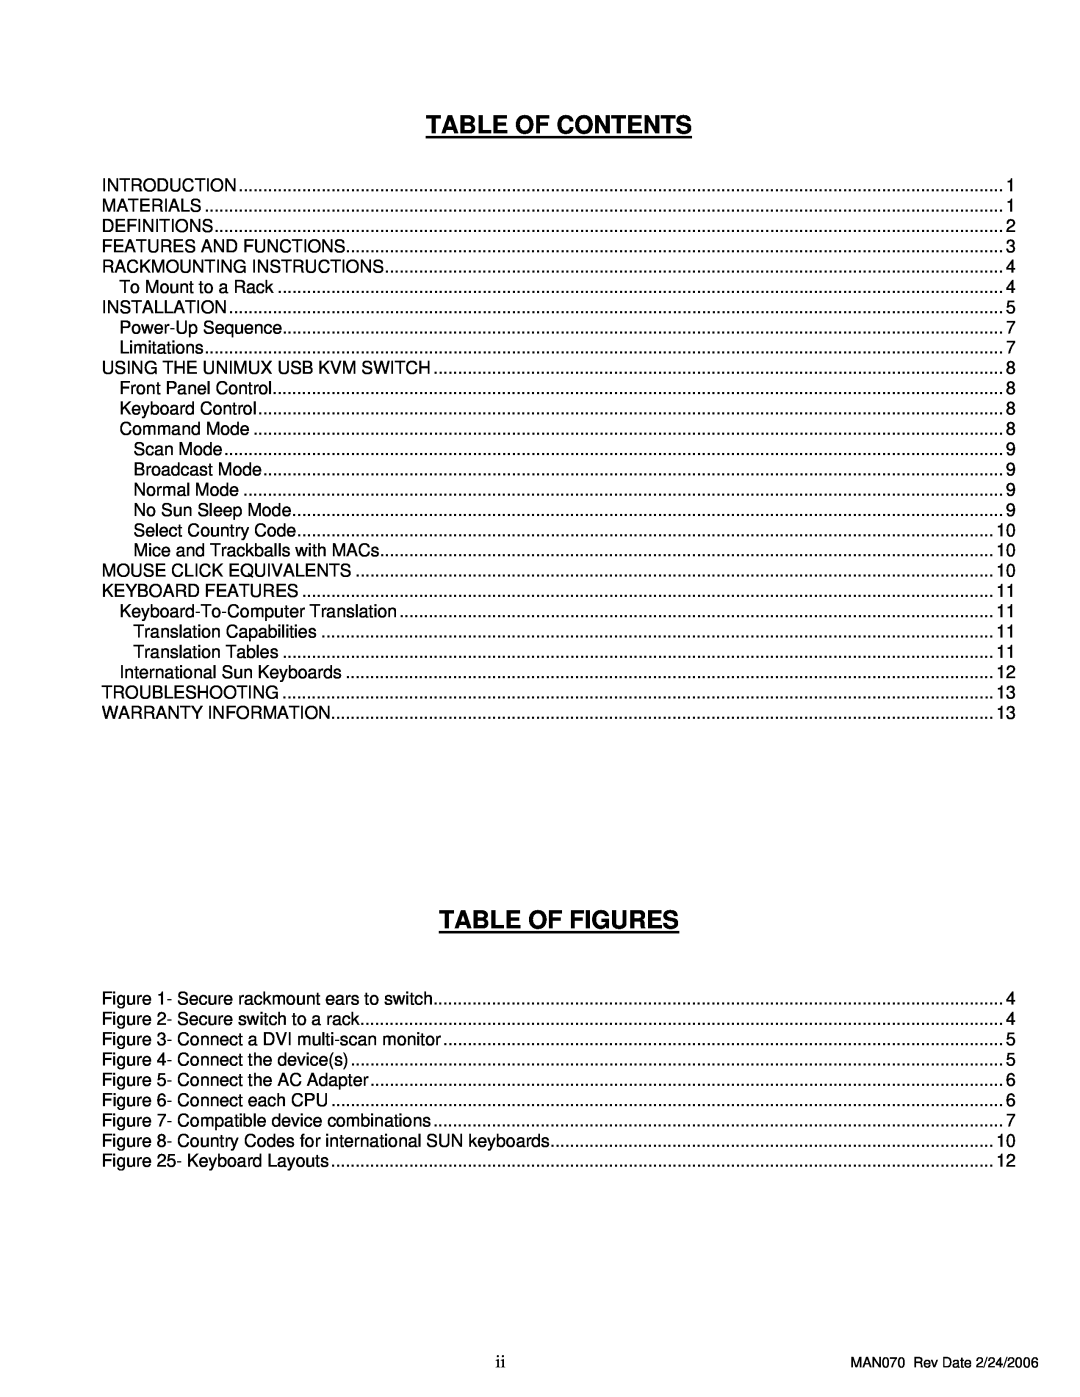 Network Technologies DVI-4 operation manual Table Of Contents, Table Of Figures 